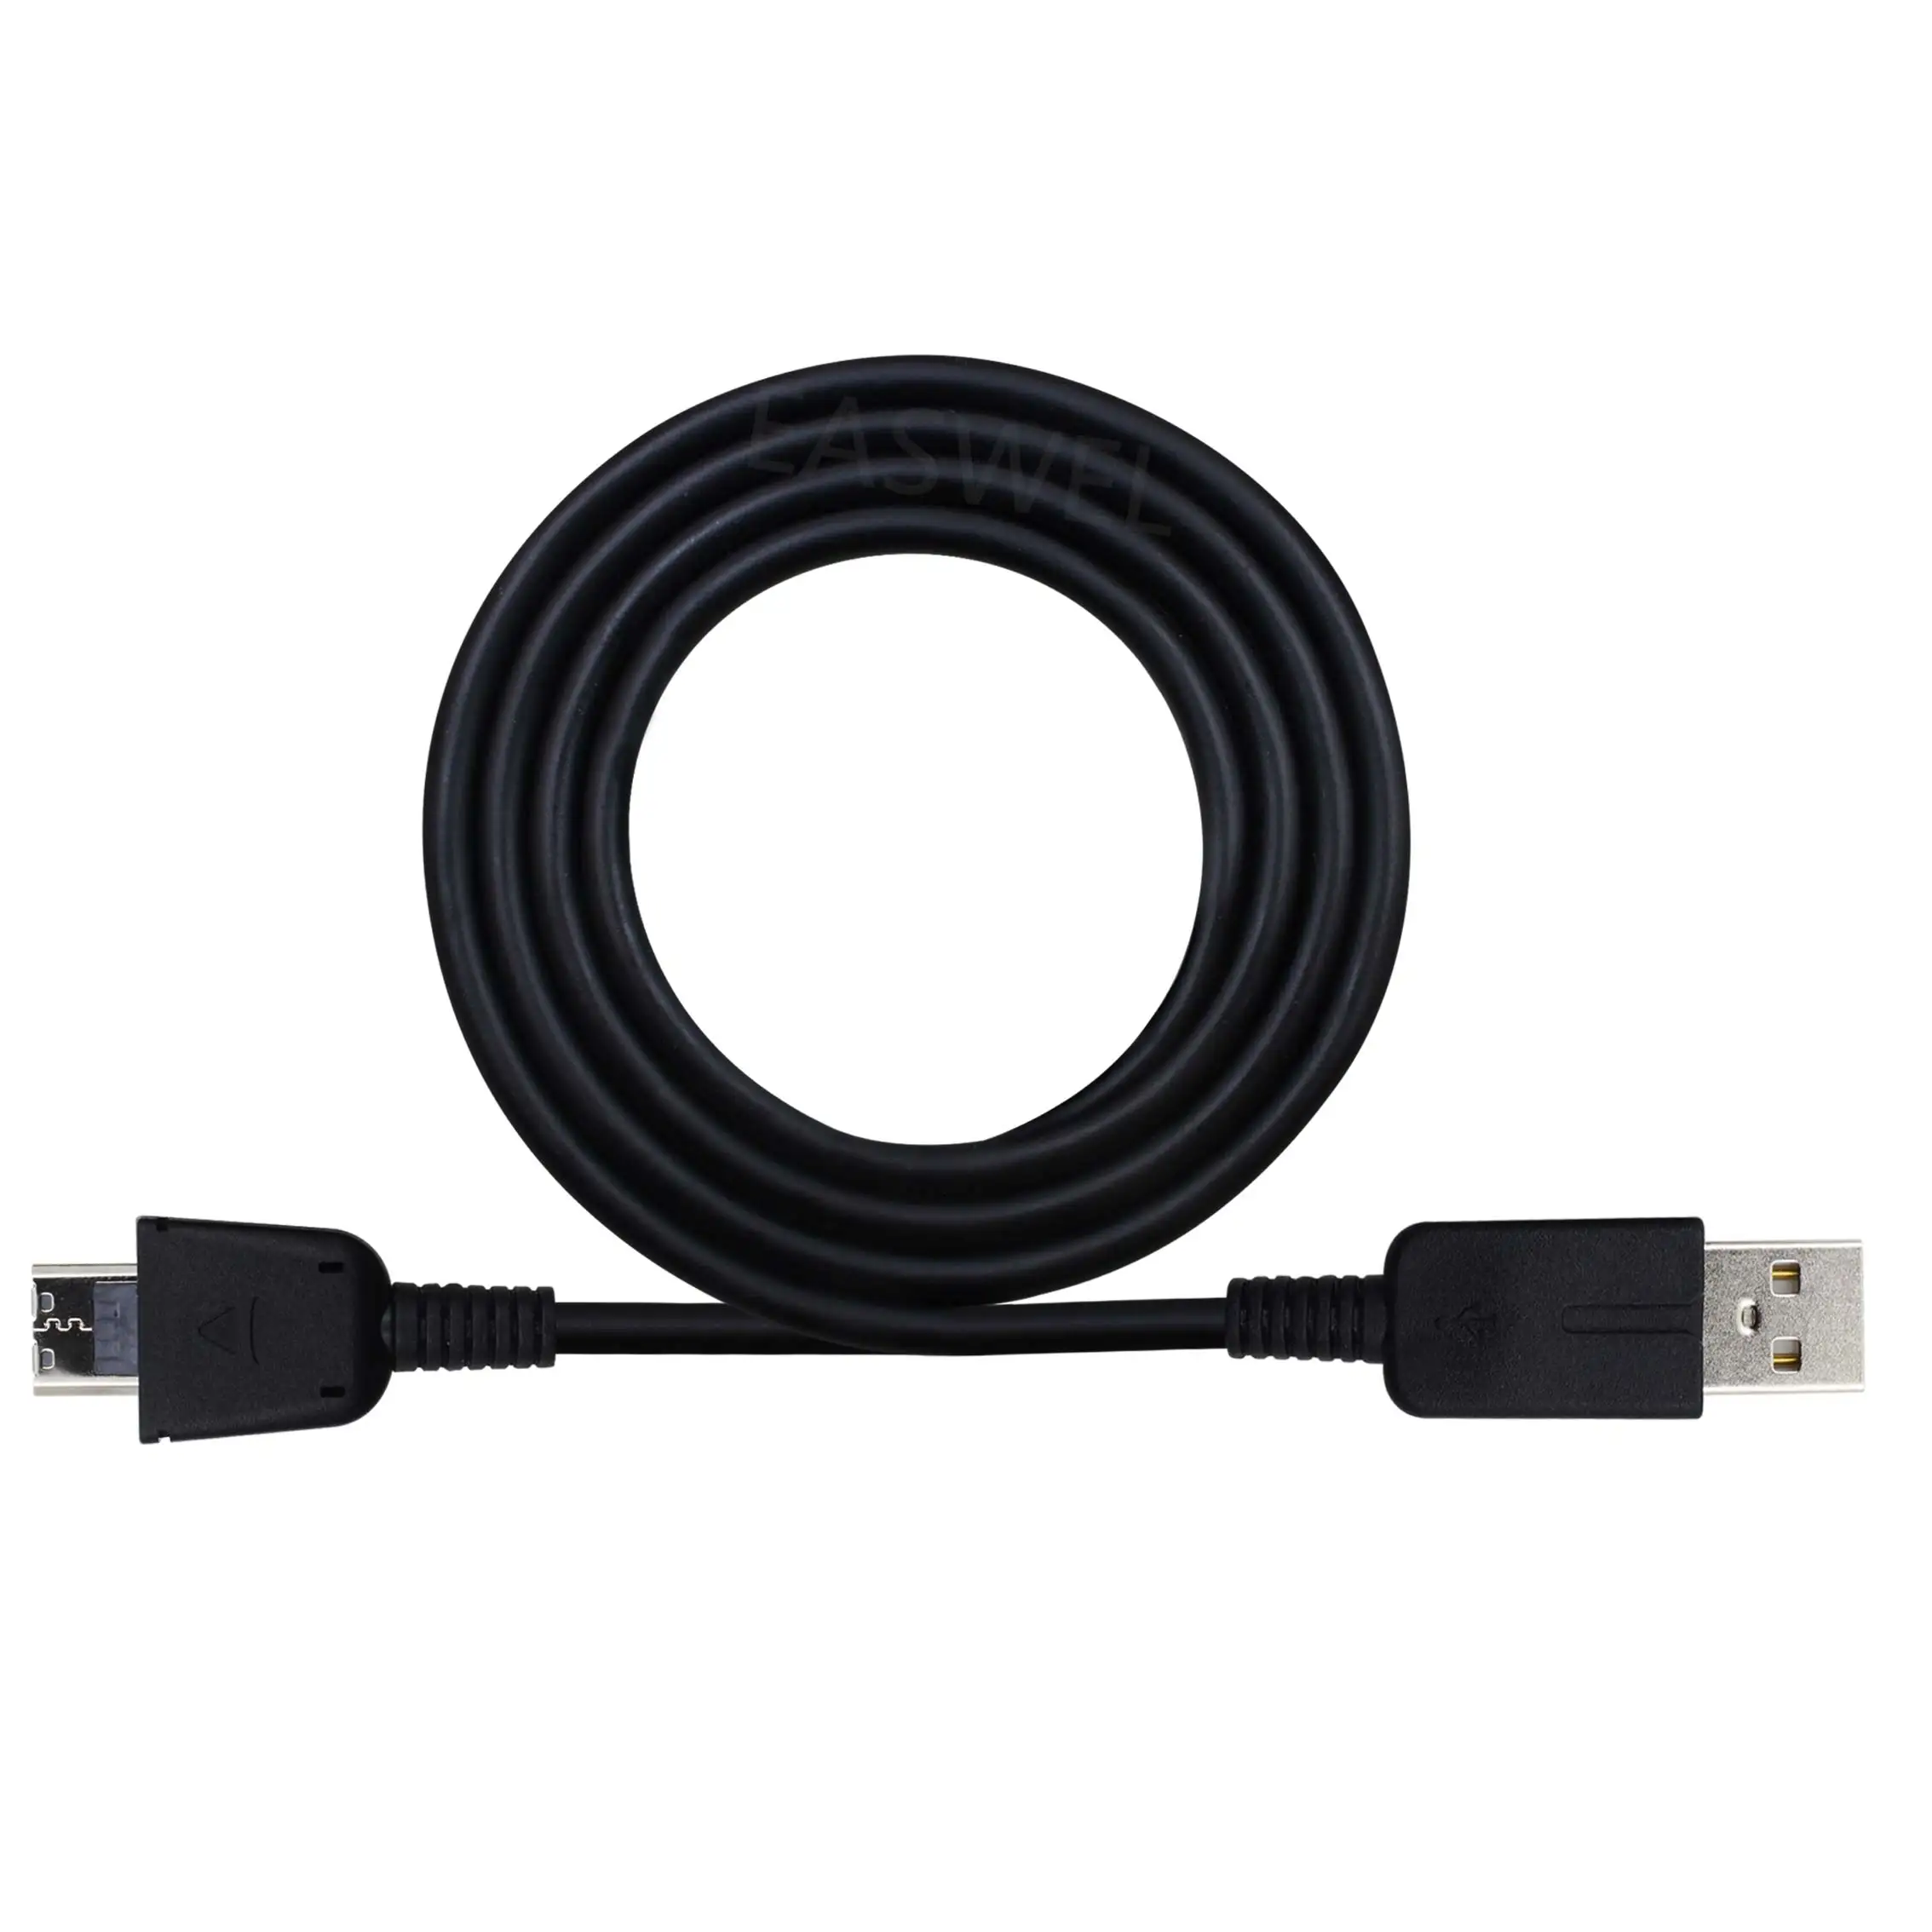 1pcs USB Sync Charger Cable Date cable for COWON I9 T2 U5 2G 4G 8G 16G MP4 Lysee Data Cables 